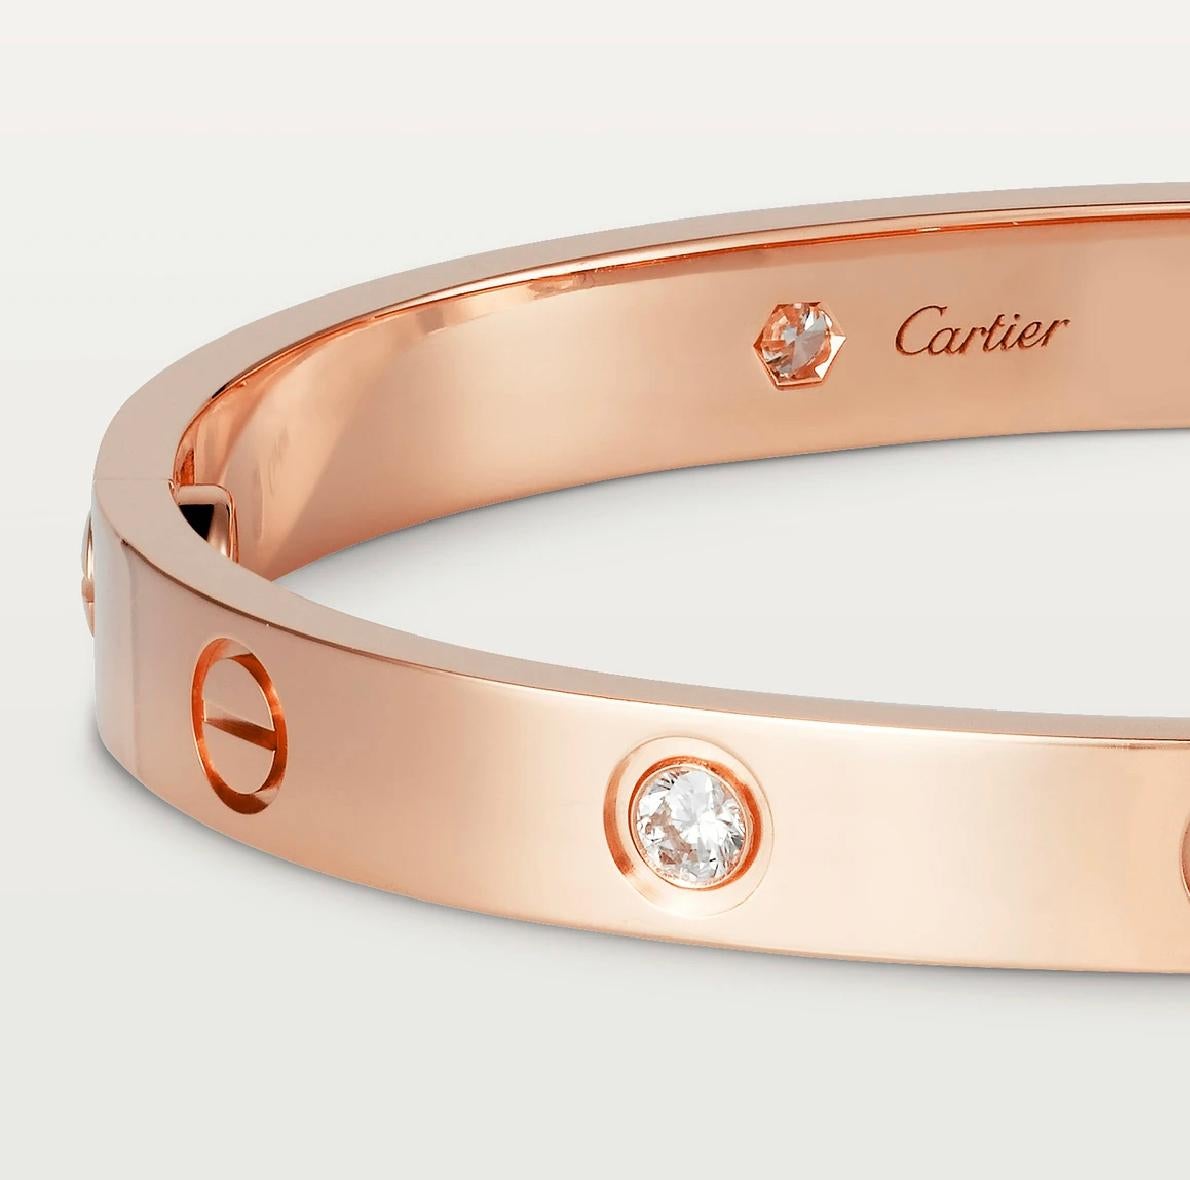 Cartier LOVE Bracelet, 18 Carat Rose Gold with 4 Diamonds

Cartier LOVE bracelet in 18 carat pink gold, set with 4 round brilliant-cut diamonds weighing 0.42 carats. Closed oval bracelet composed of two rigid arches that are worn on the wrist and